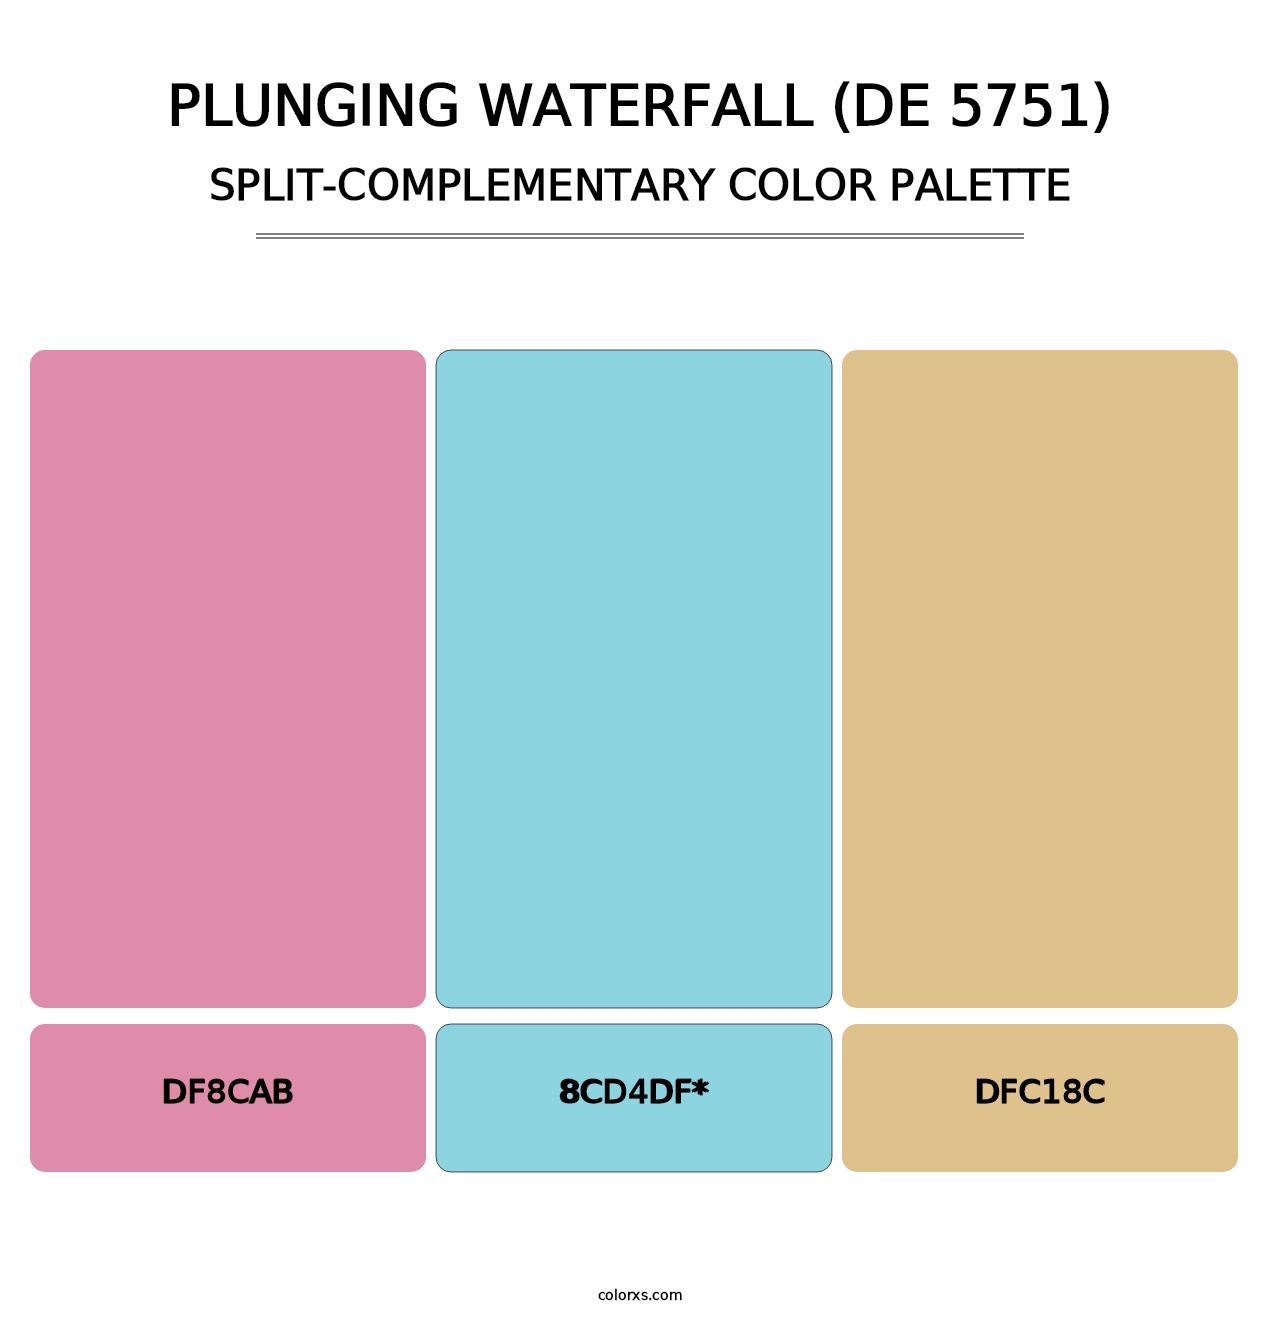 Plunging Waterfall (DE 5751) - Split-Complementary Color Palette